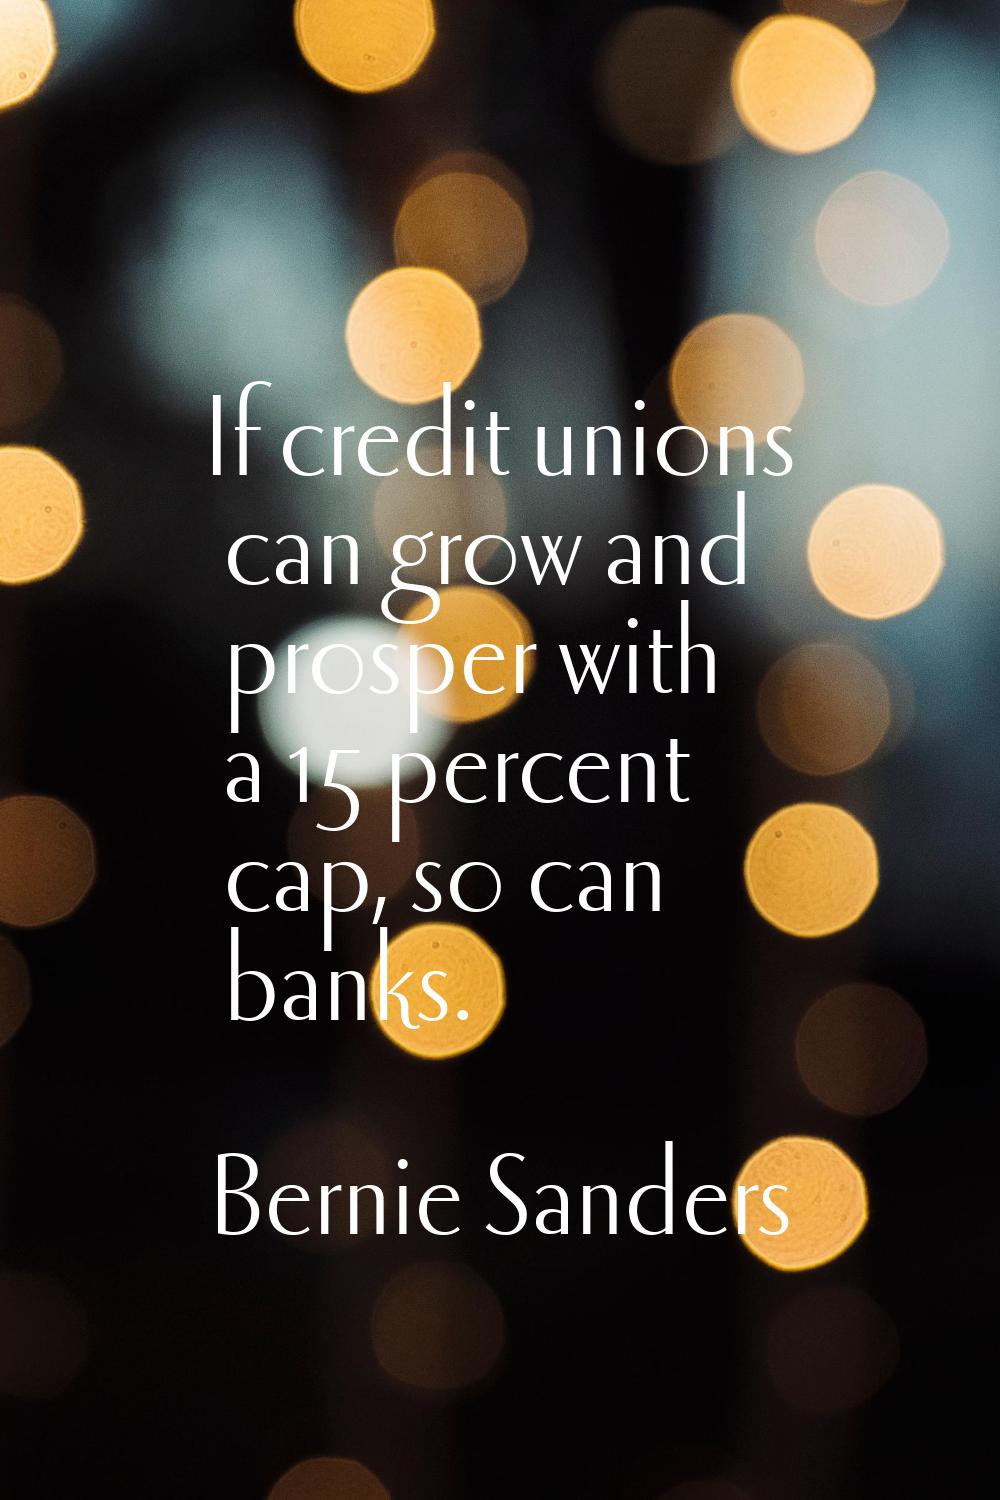 If credit unions can grow and prosper with a 15 percent cap, so can banks.